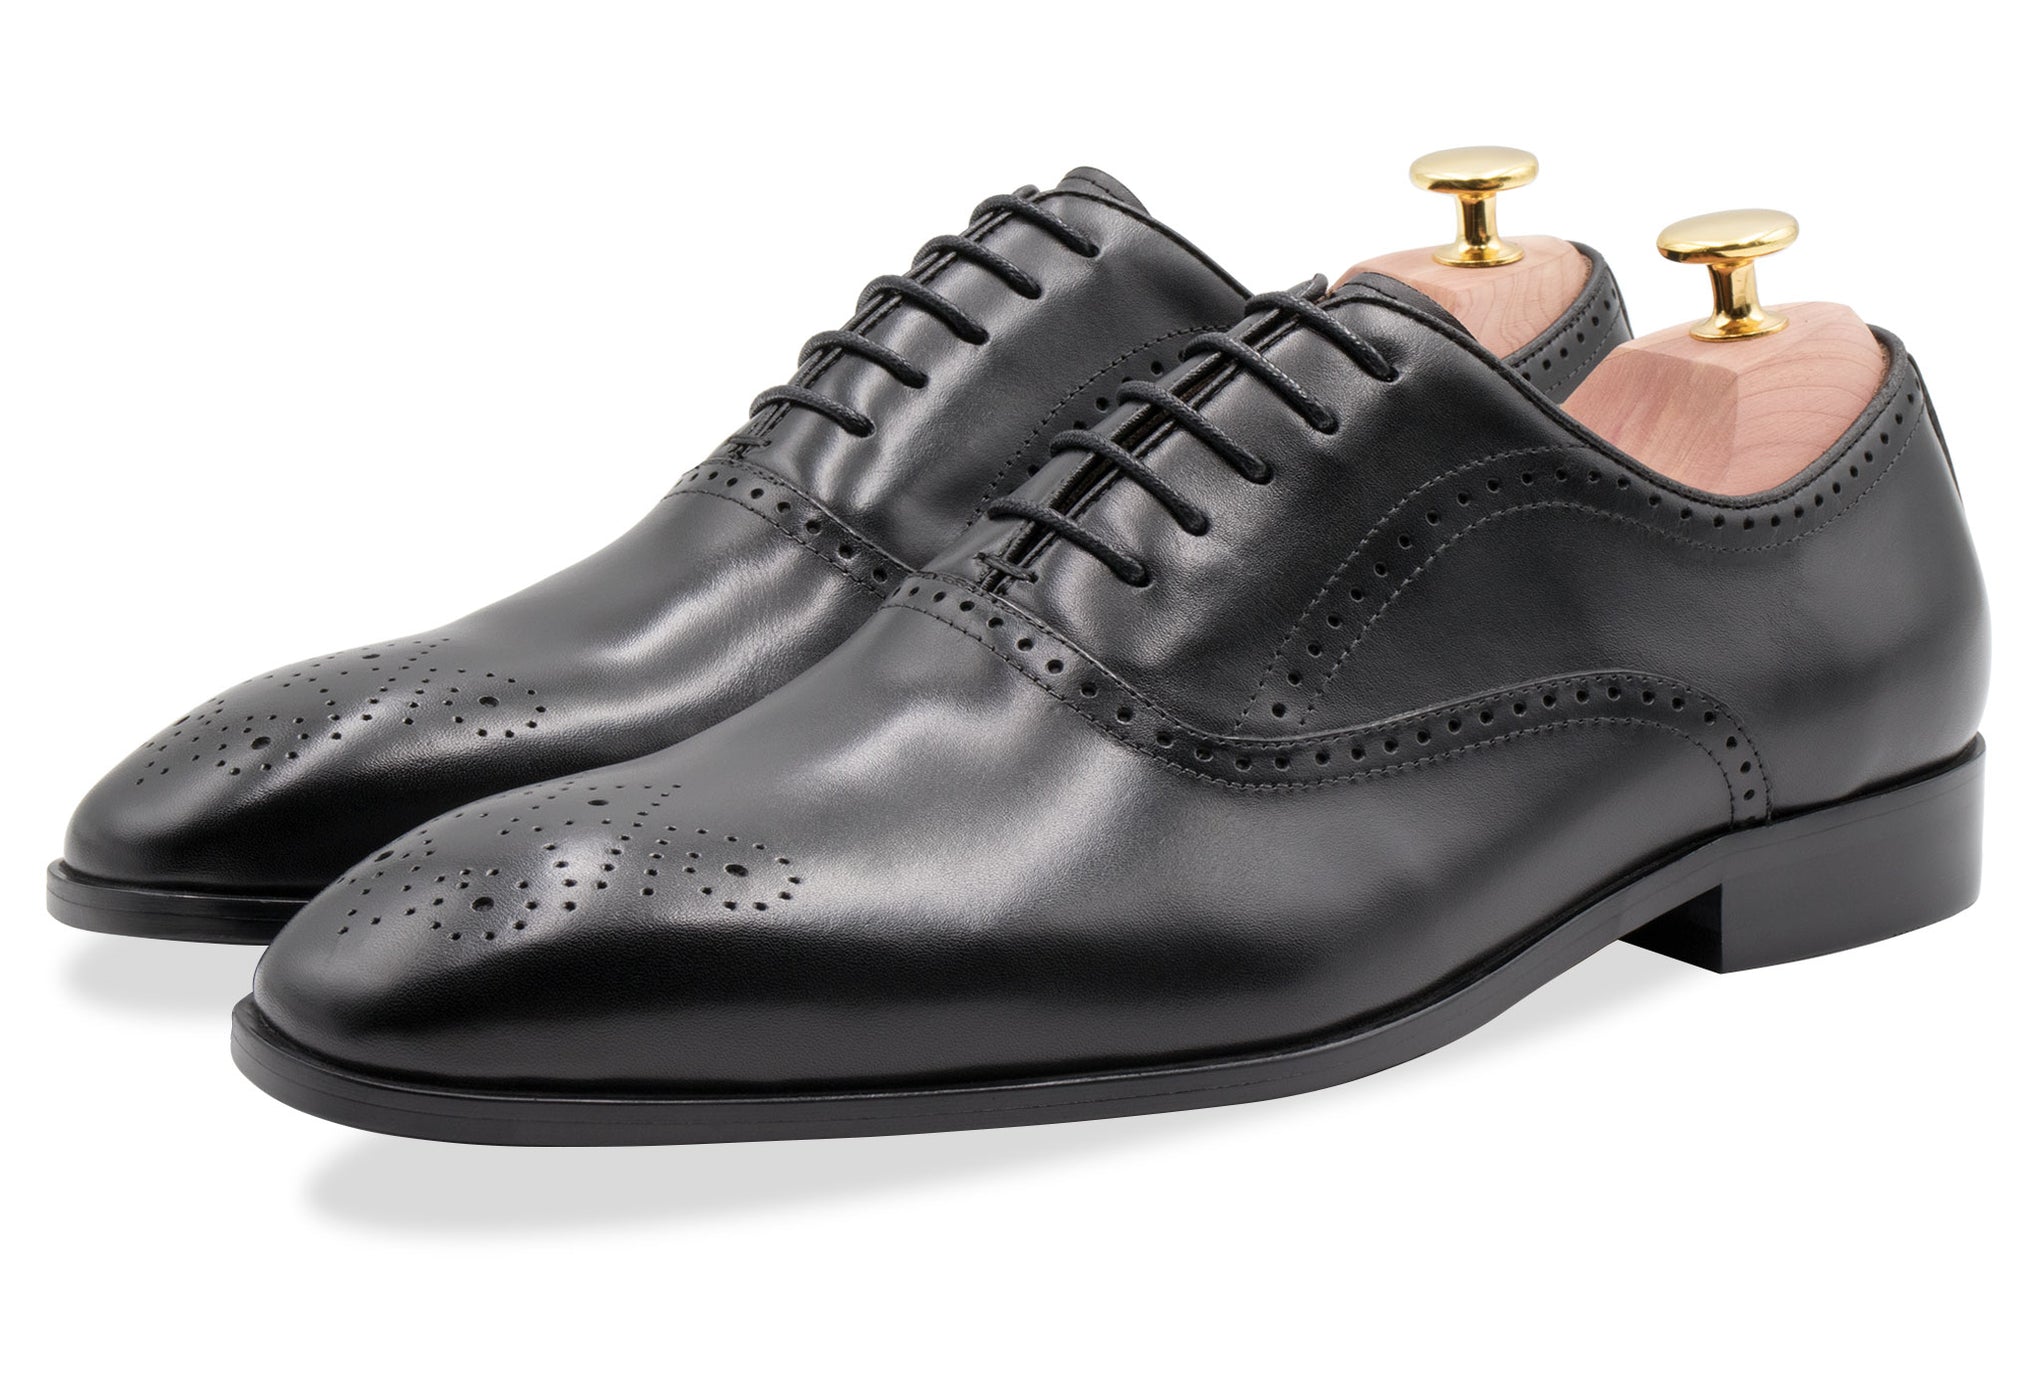 Oxford Shoes for Men Collection - Arden Teal